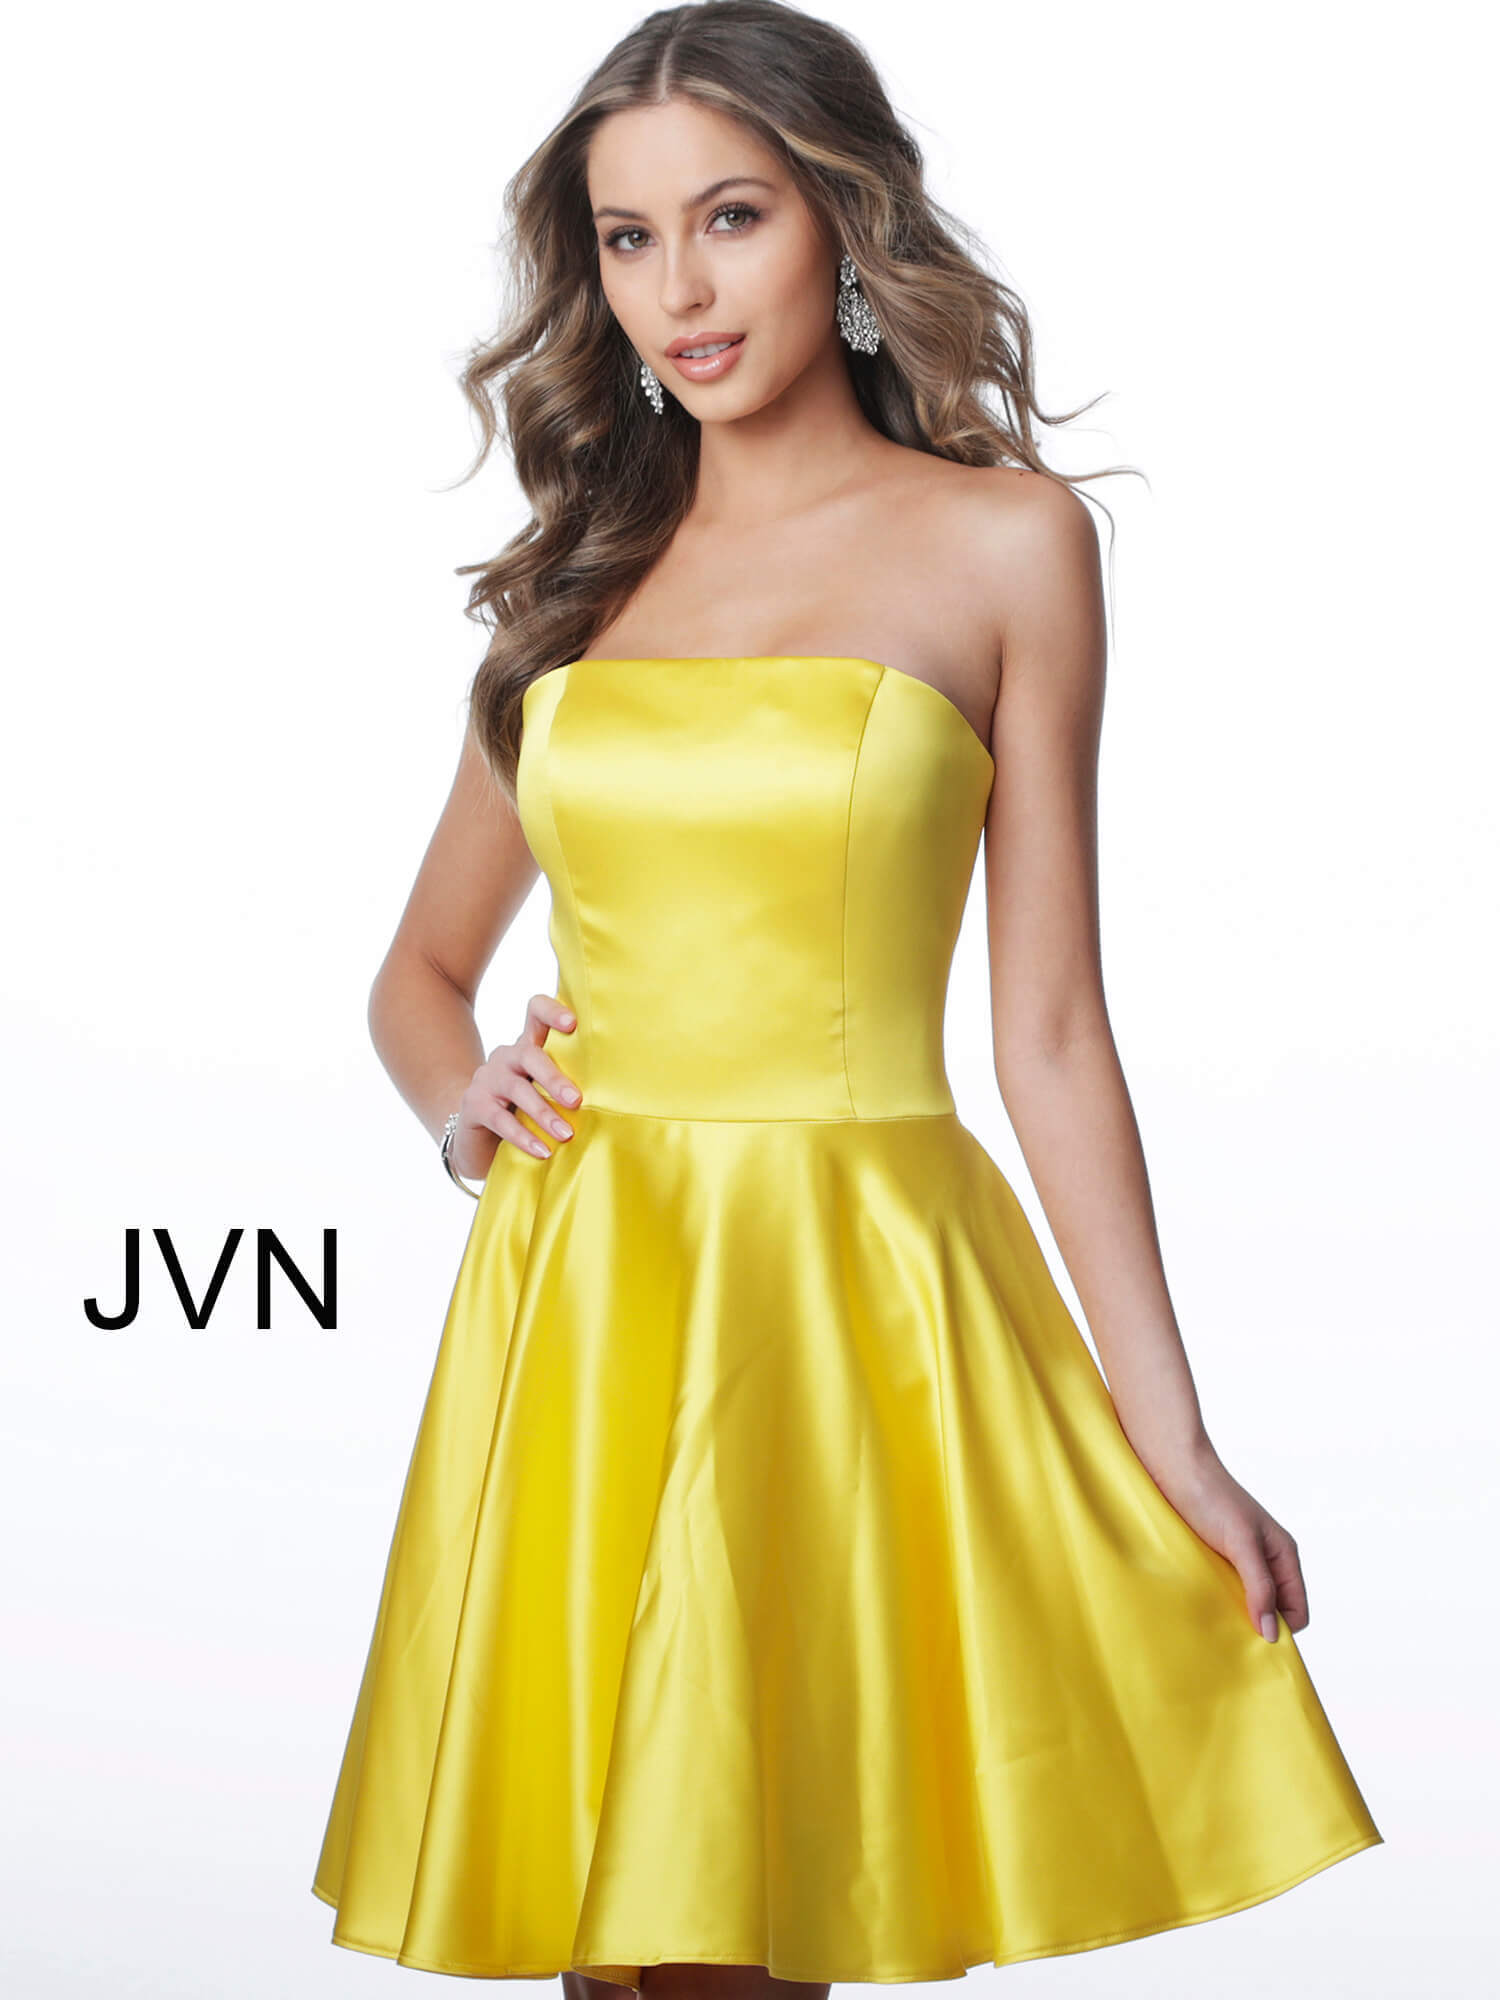 JVN1717 Dress Yellow short fit and flare straight neck cocktail dress